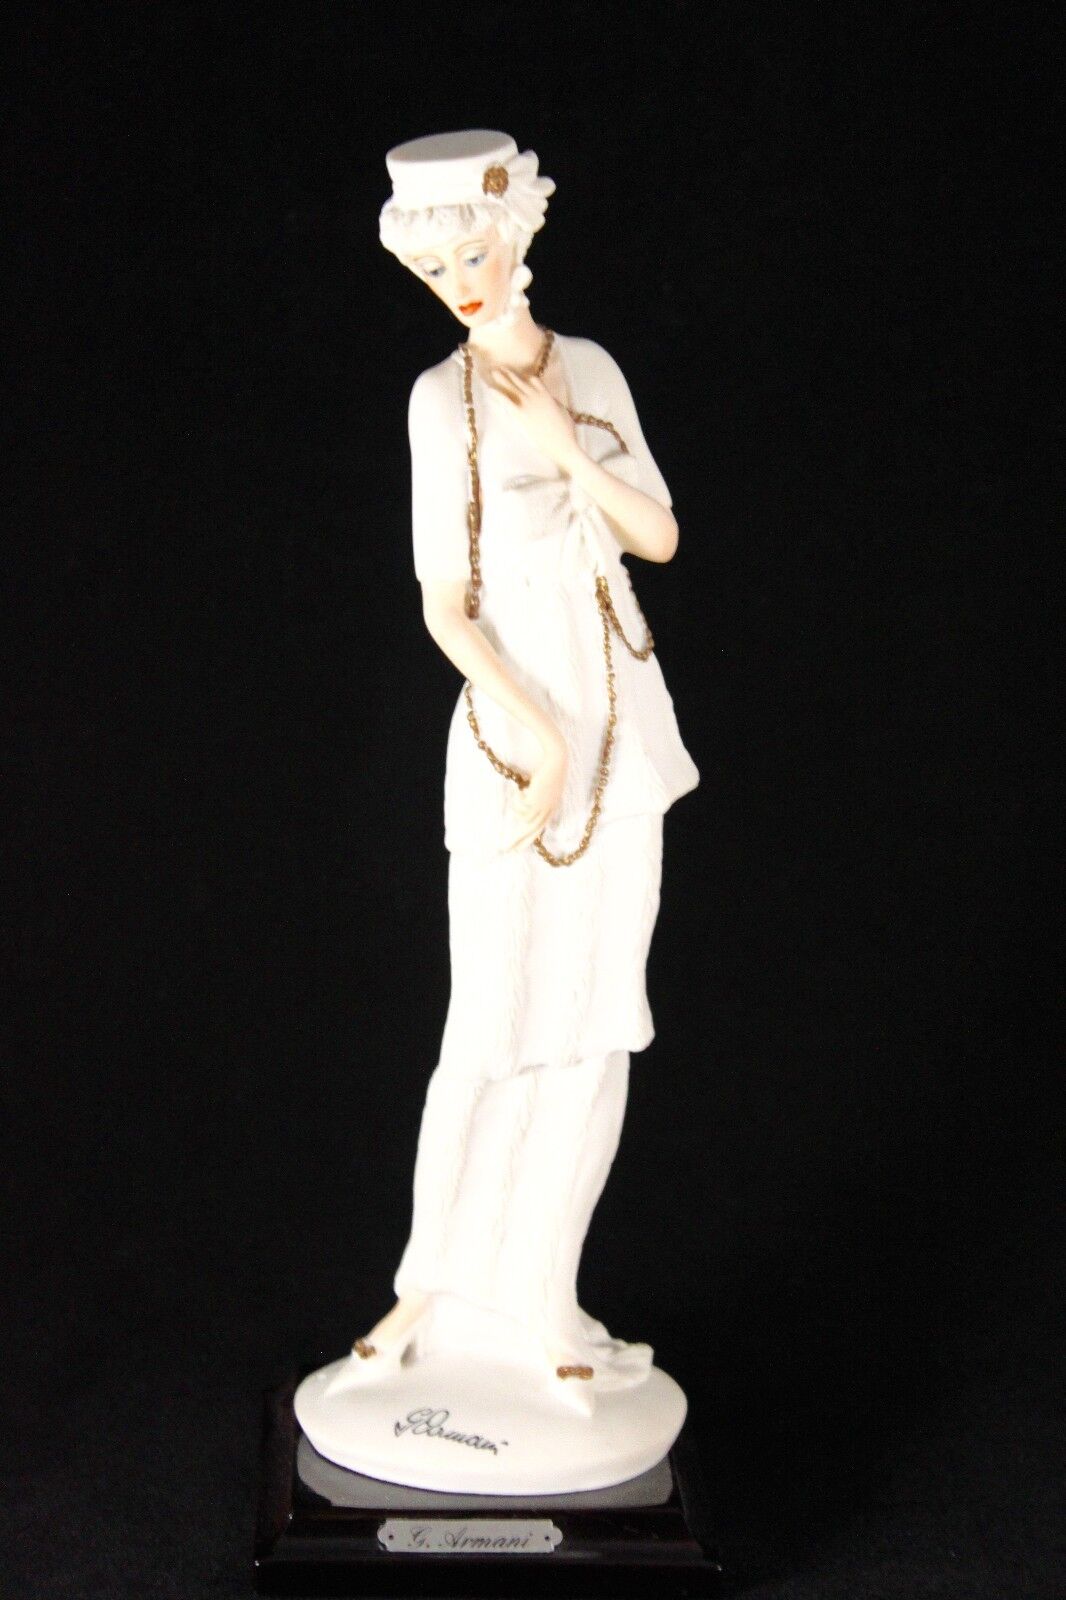 G. ARMANI FLORENCE FIGURINE SCULPTURE ‘LADY WITH CHAIN’ 411F – MINT